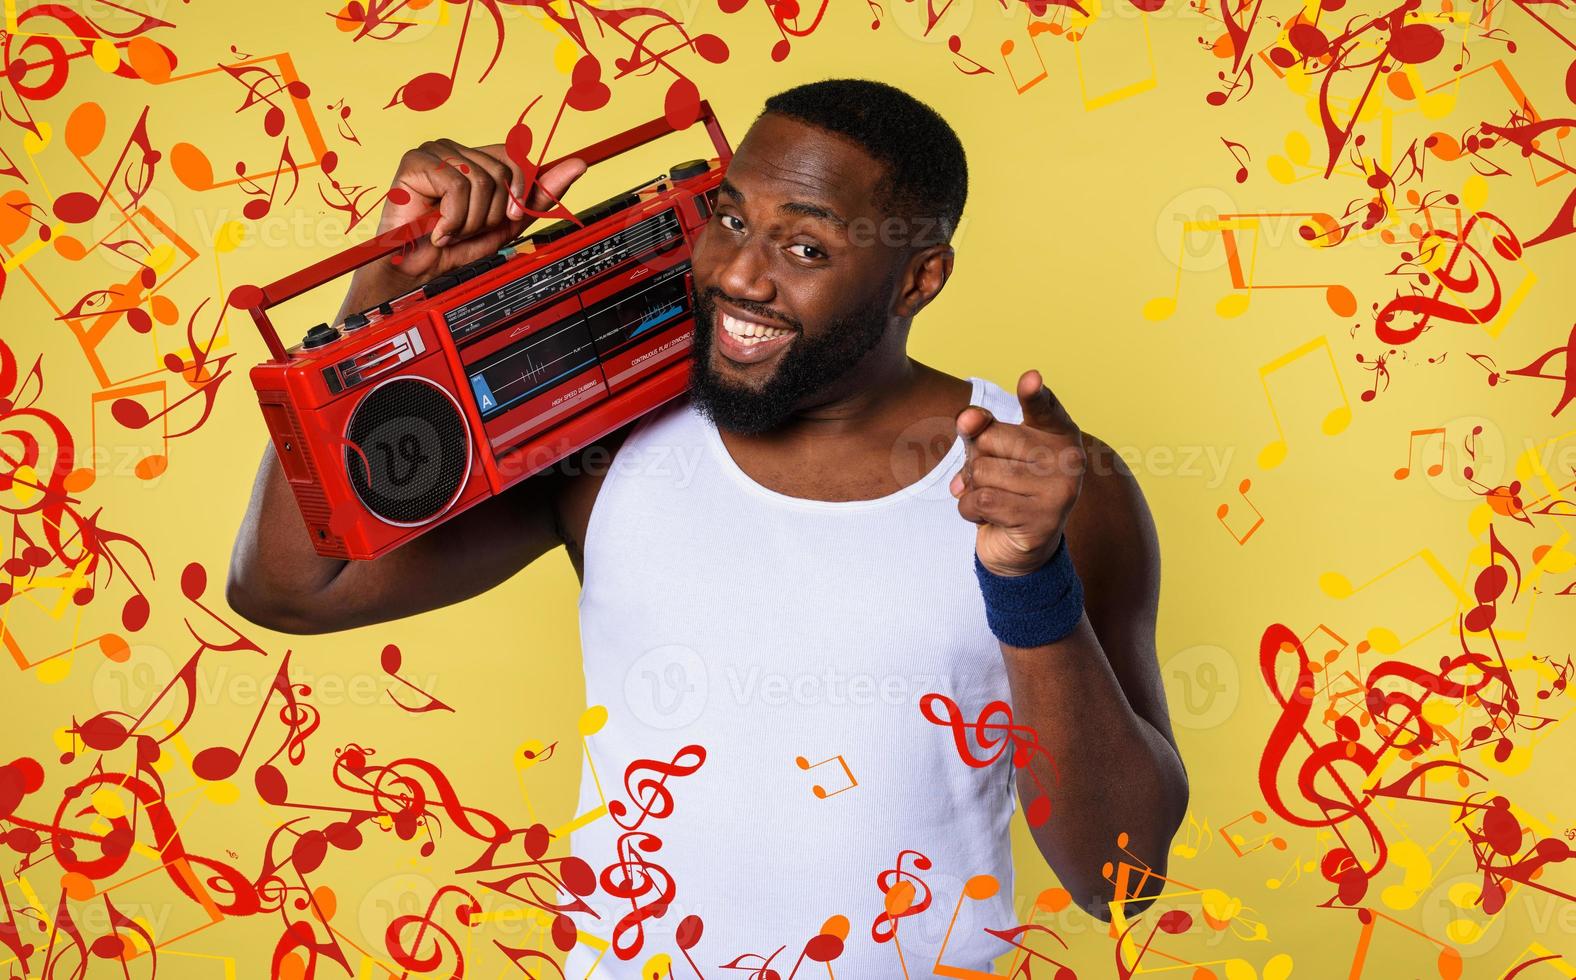 Man ears the music with an old stereo and dances. emotional and energetic expression. yellow background photo